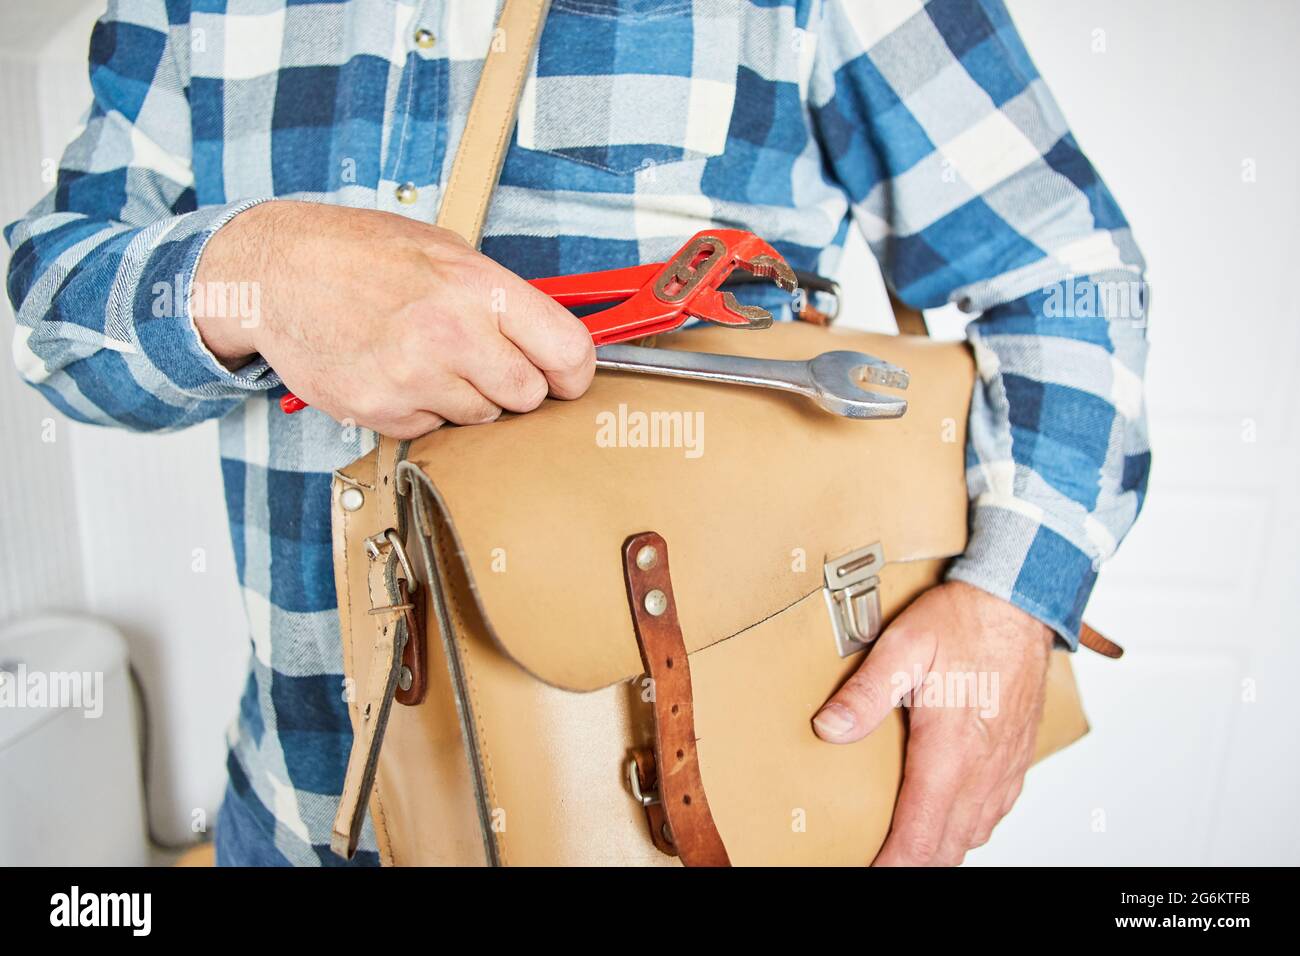 Craftsman as plumber from the emergency service with leather bag and tools Stock Photo